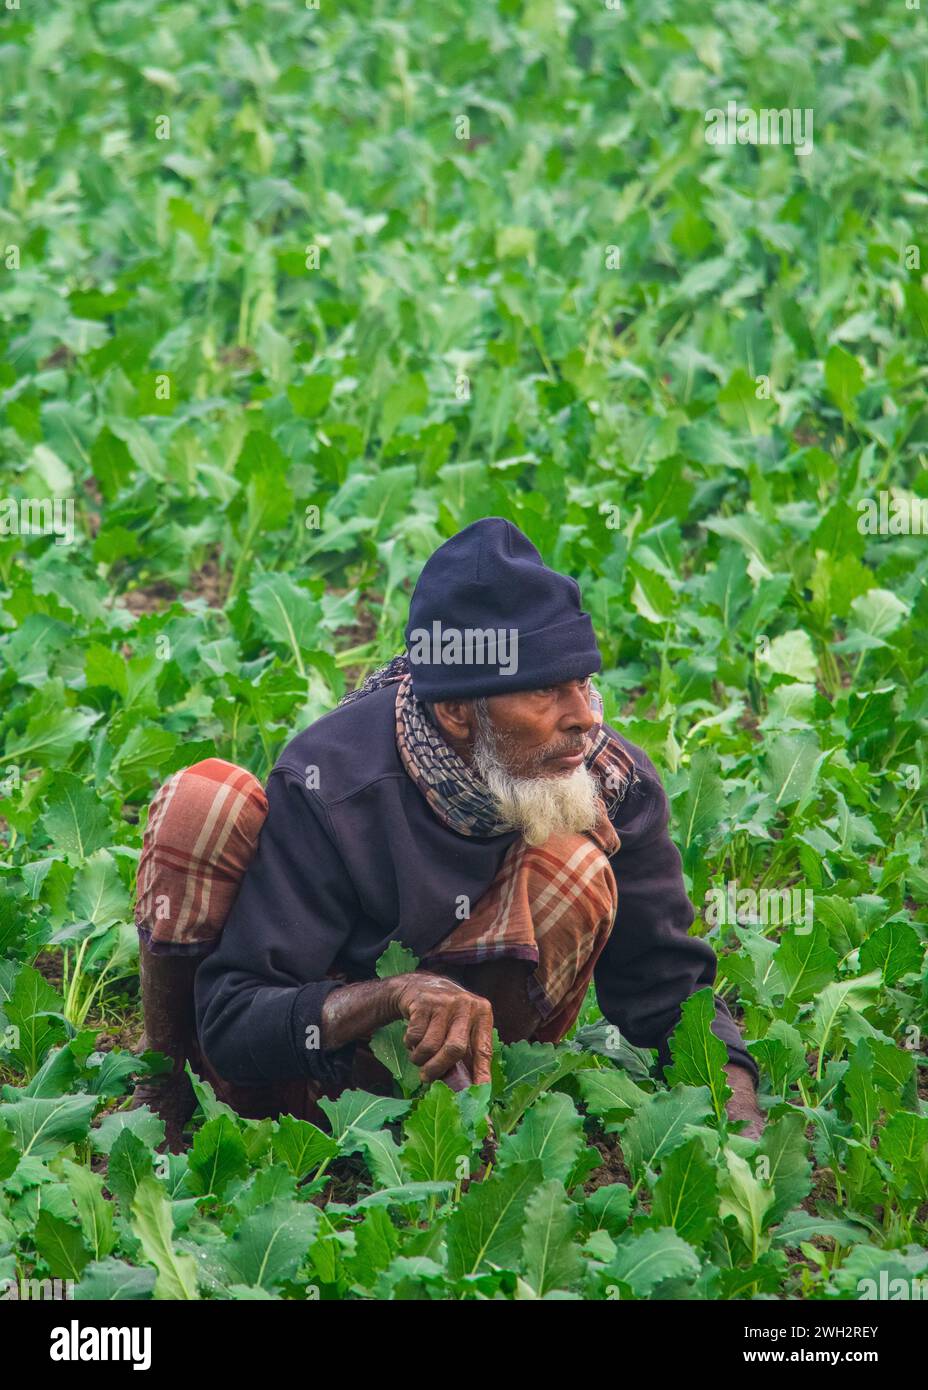 Farmers work in their vegetable fields In the serene winter dawn of Saver, their breath visible in the gentle air. This image was captured on January Stock Photo